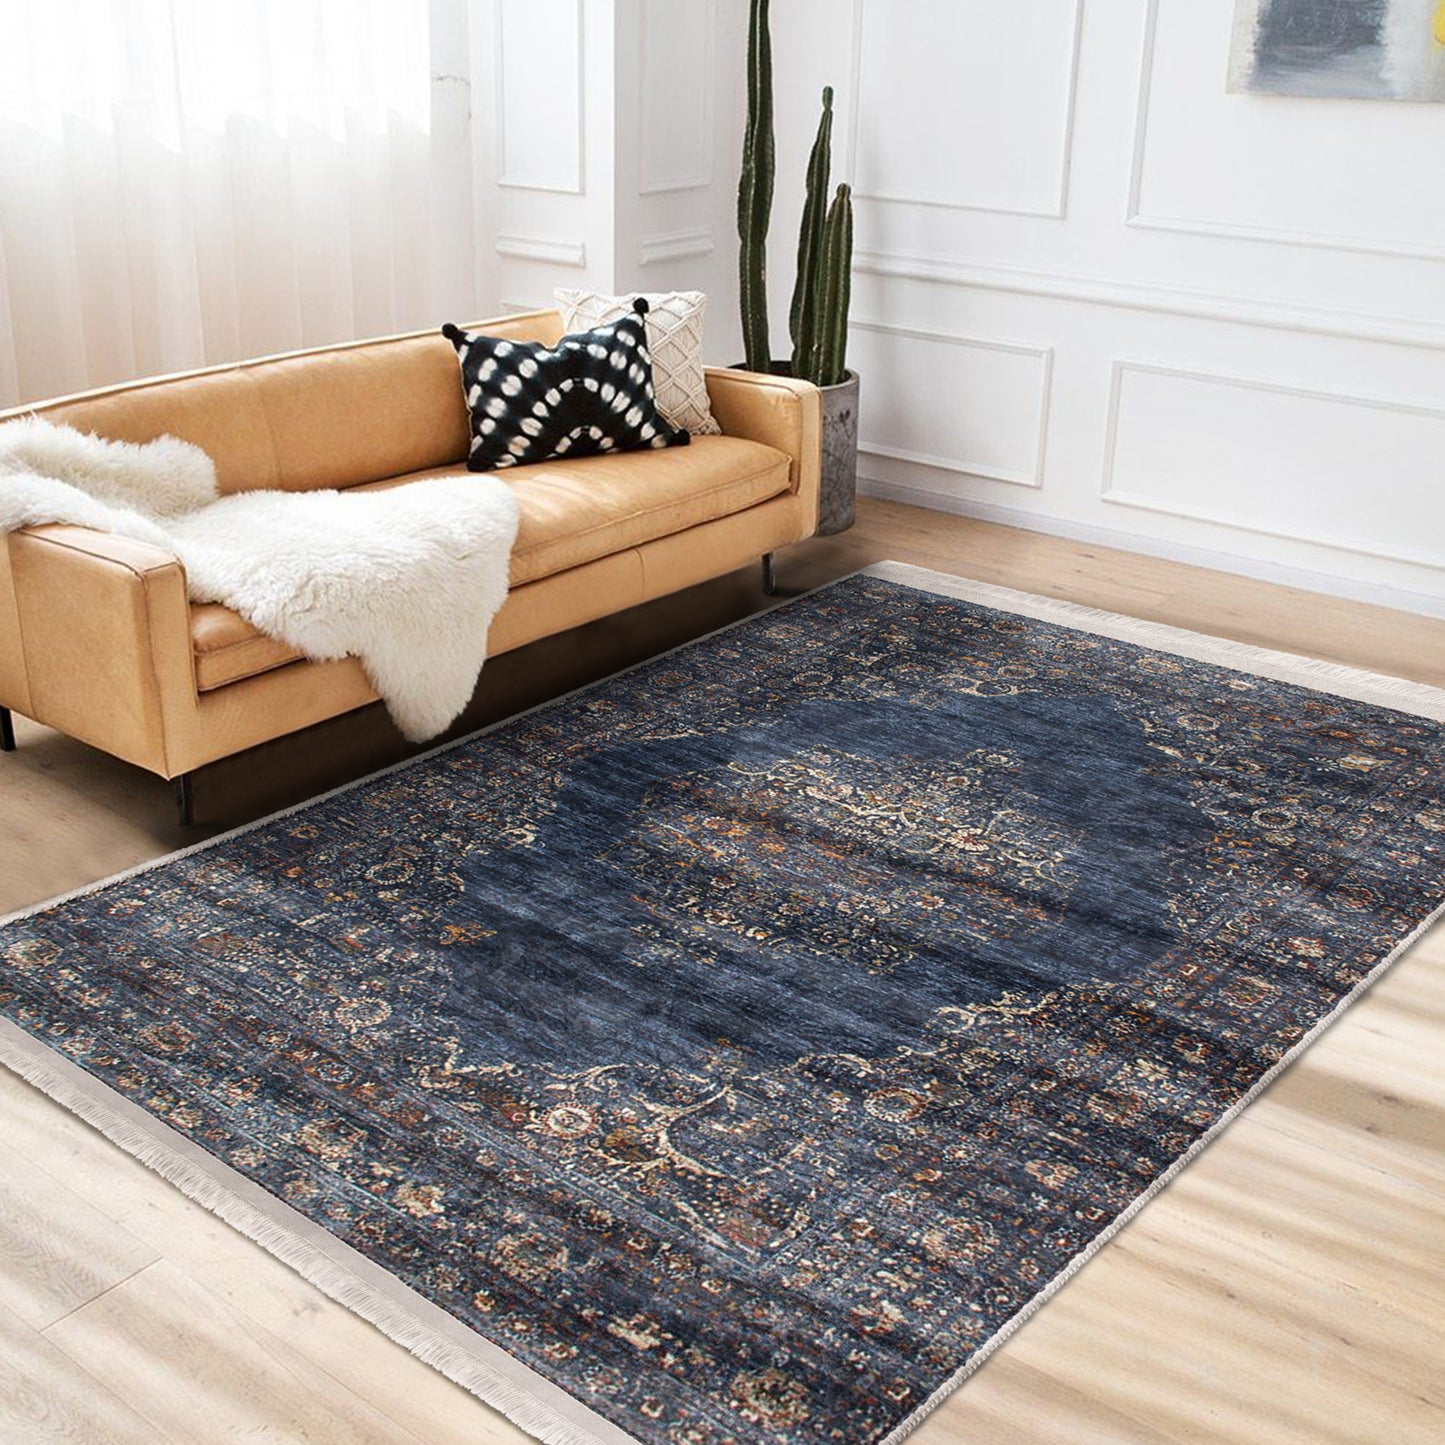 Versatile Traditional Area Rug - Office or Study Space